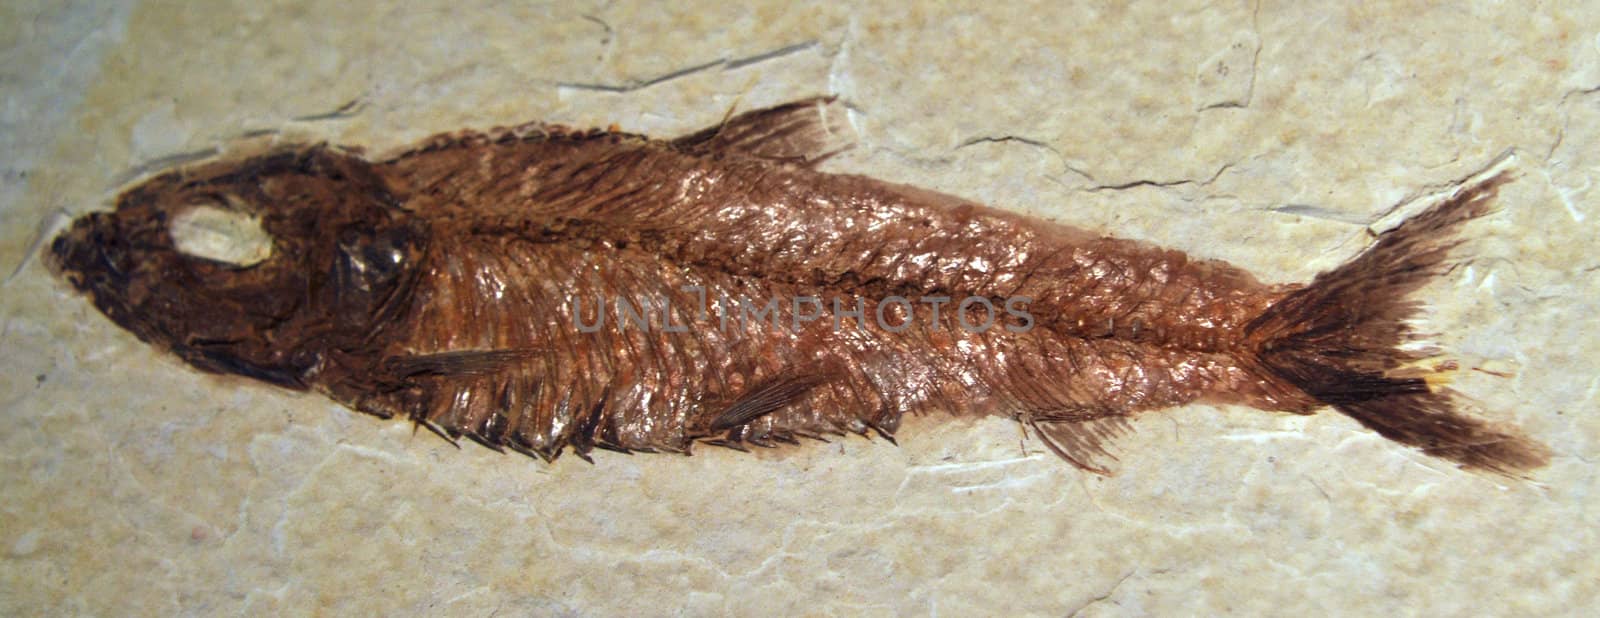 big size close image of ancient fish fossil